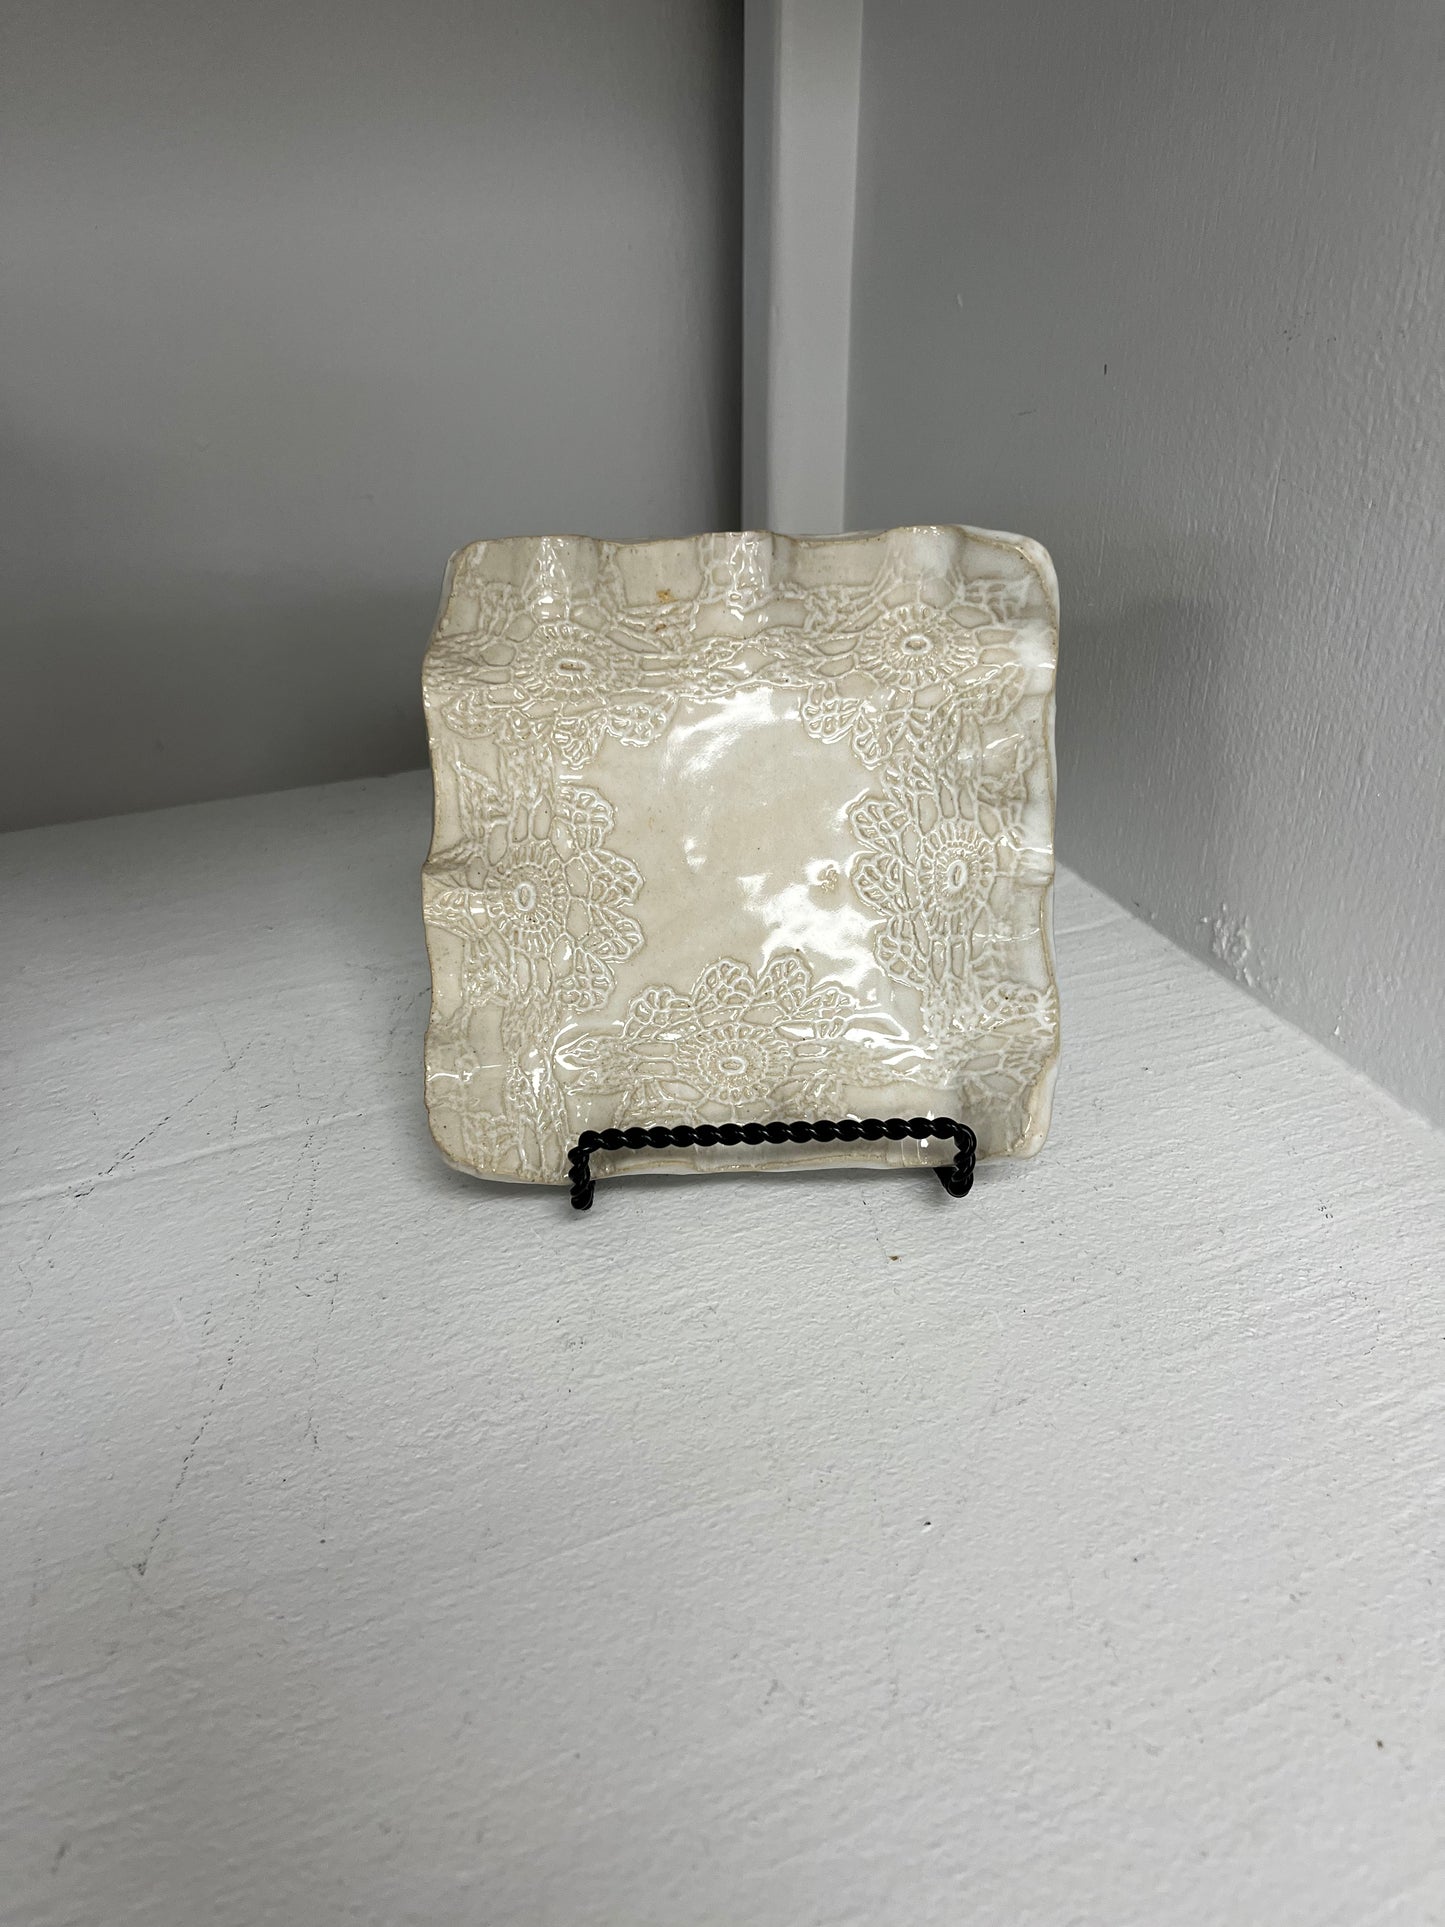 FP Square Candle Holder in High Cotton